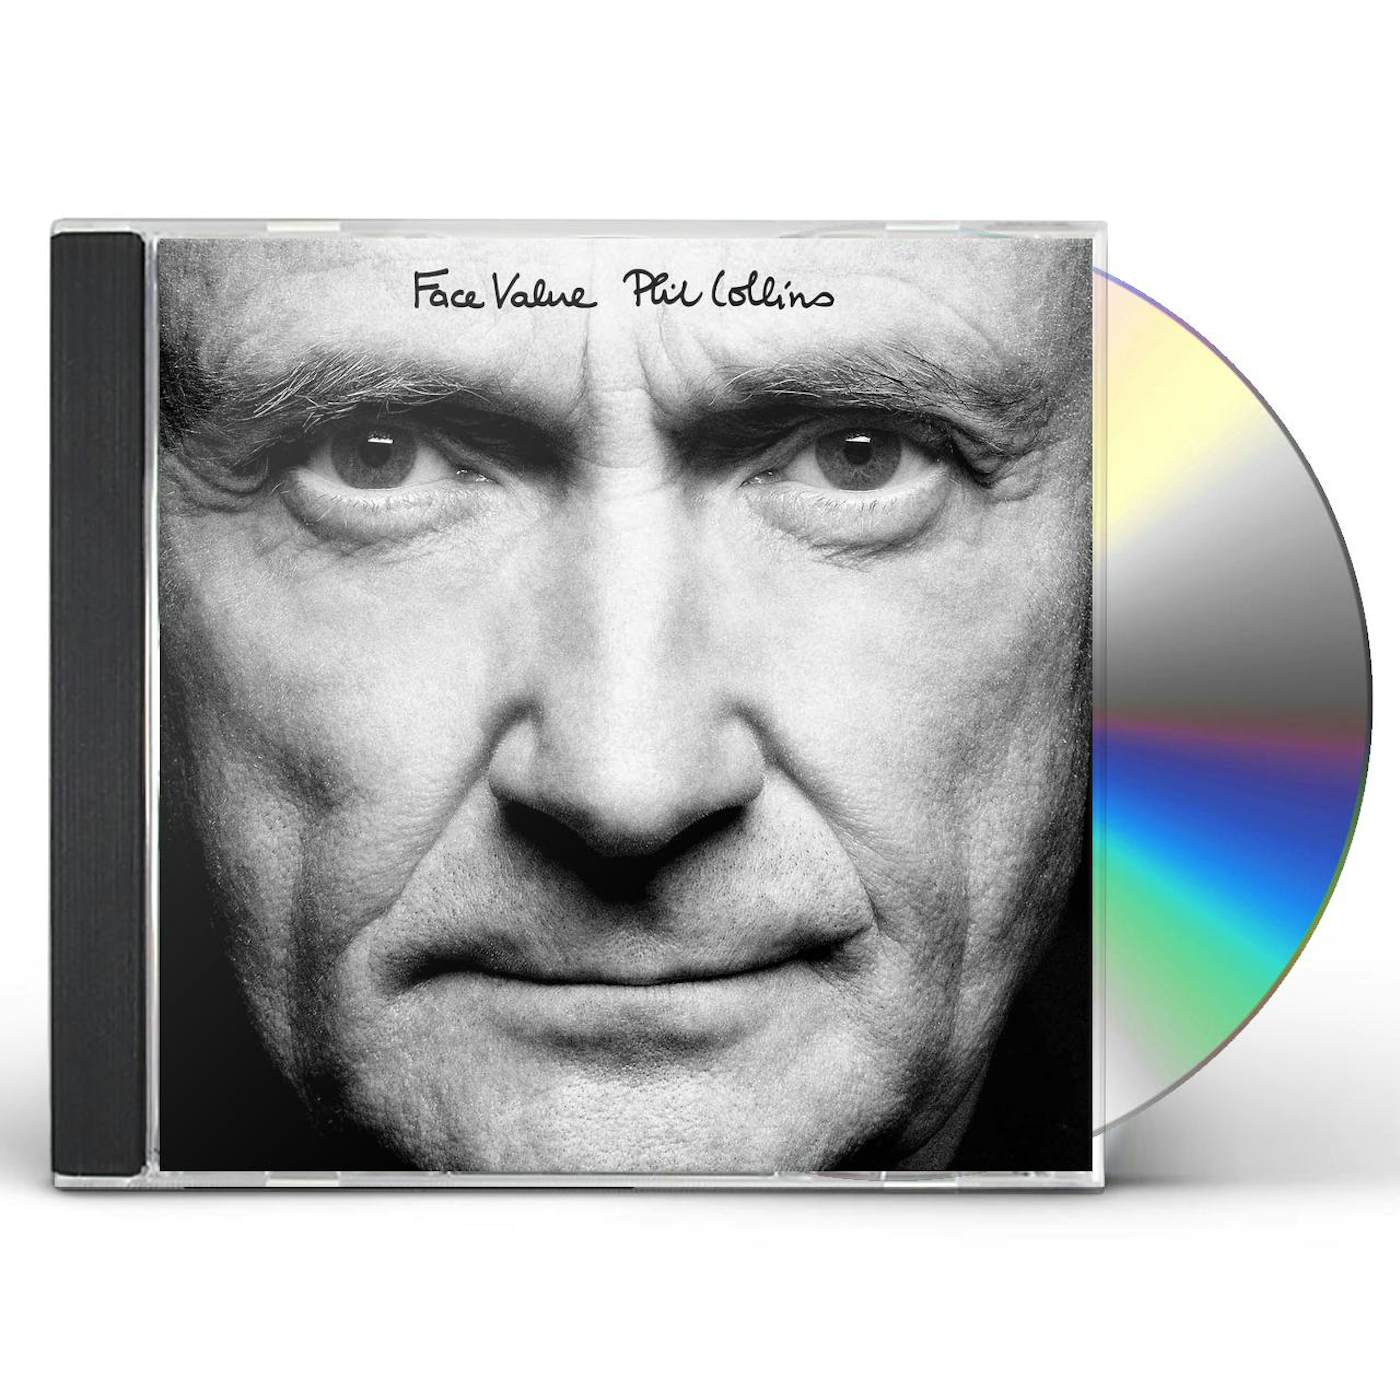 Phil Collins FACE VALUE CD